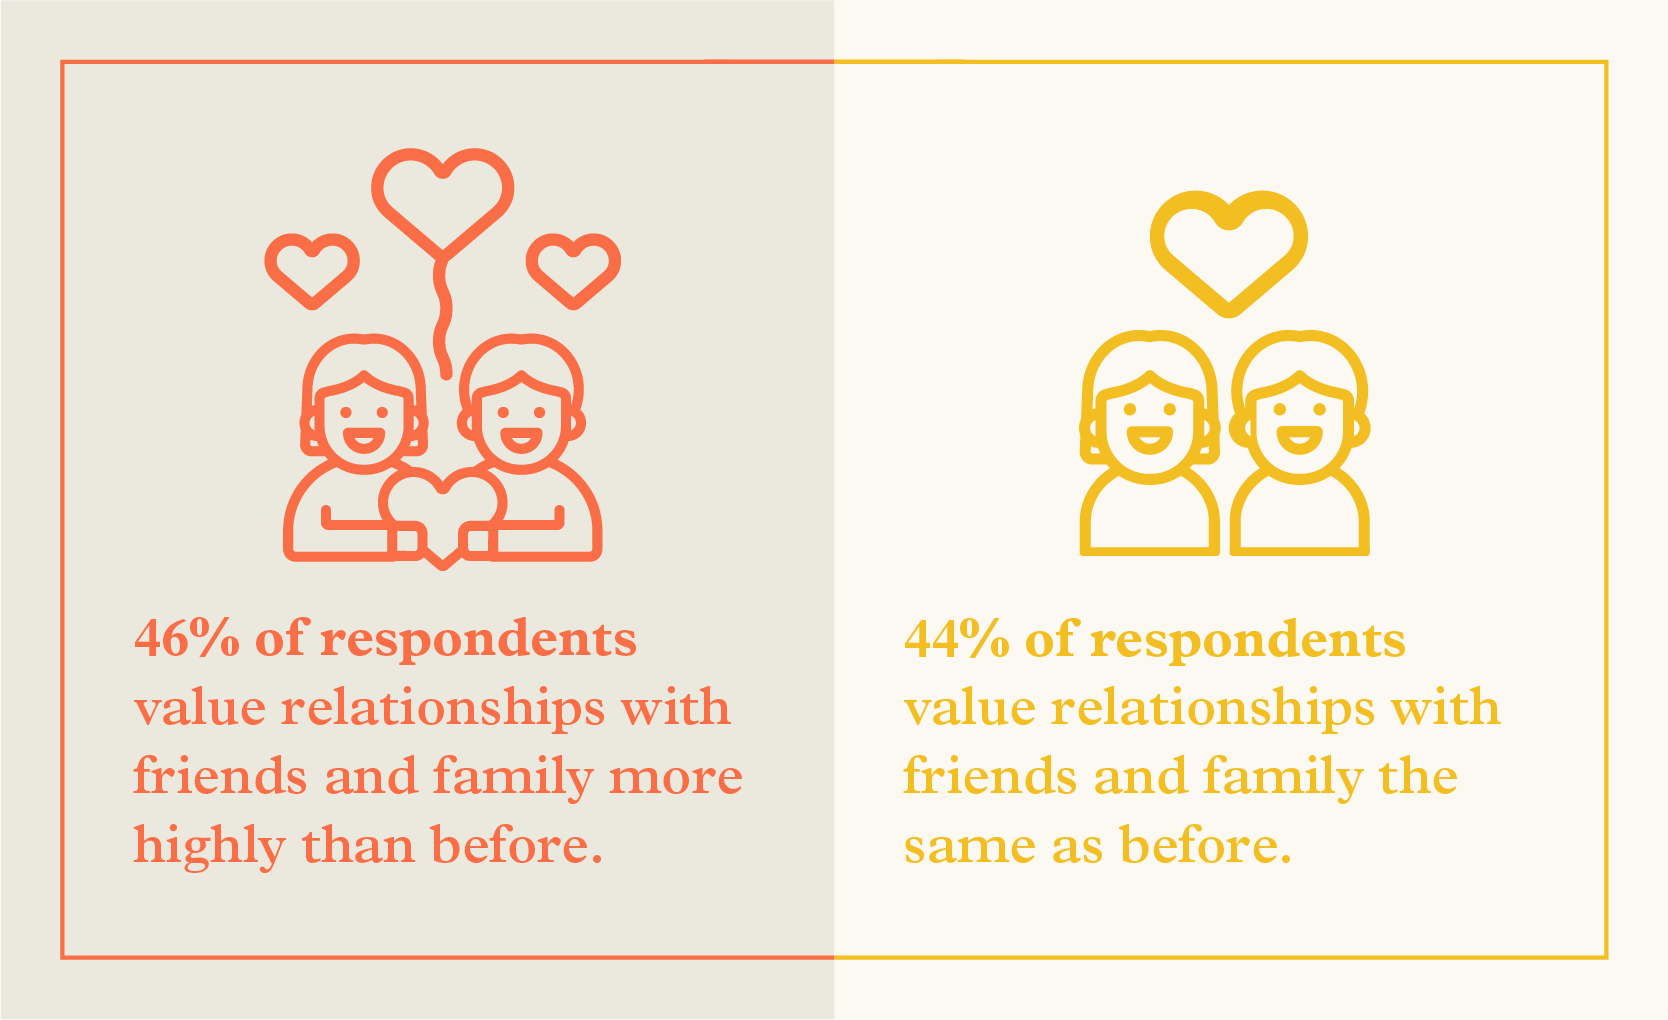 Infographic with two sections. On one section, it explains that 46% of respondents value relationships more highly than before; in the other, it explains that 44% of respondents value relationships the same as before.